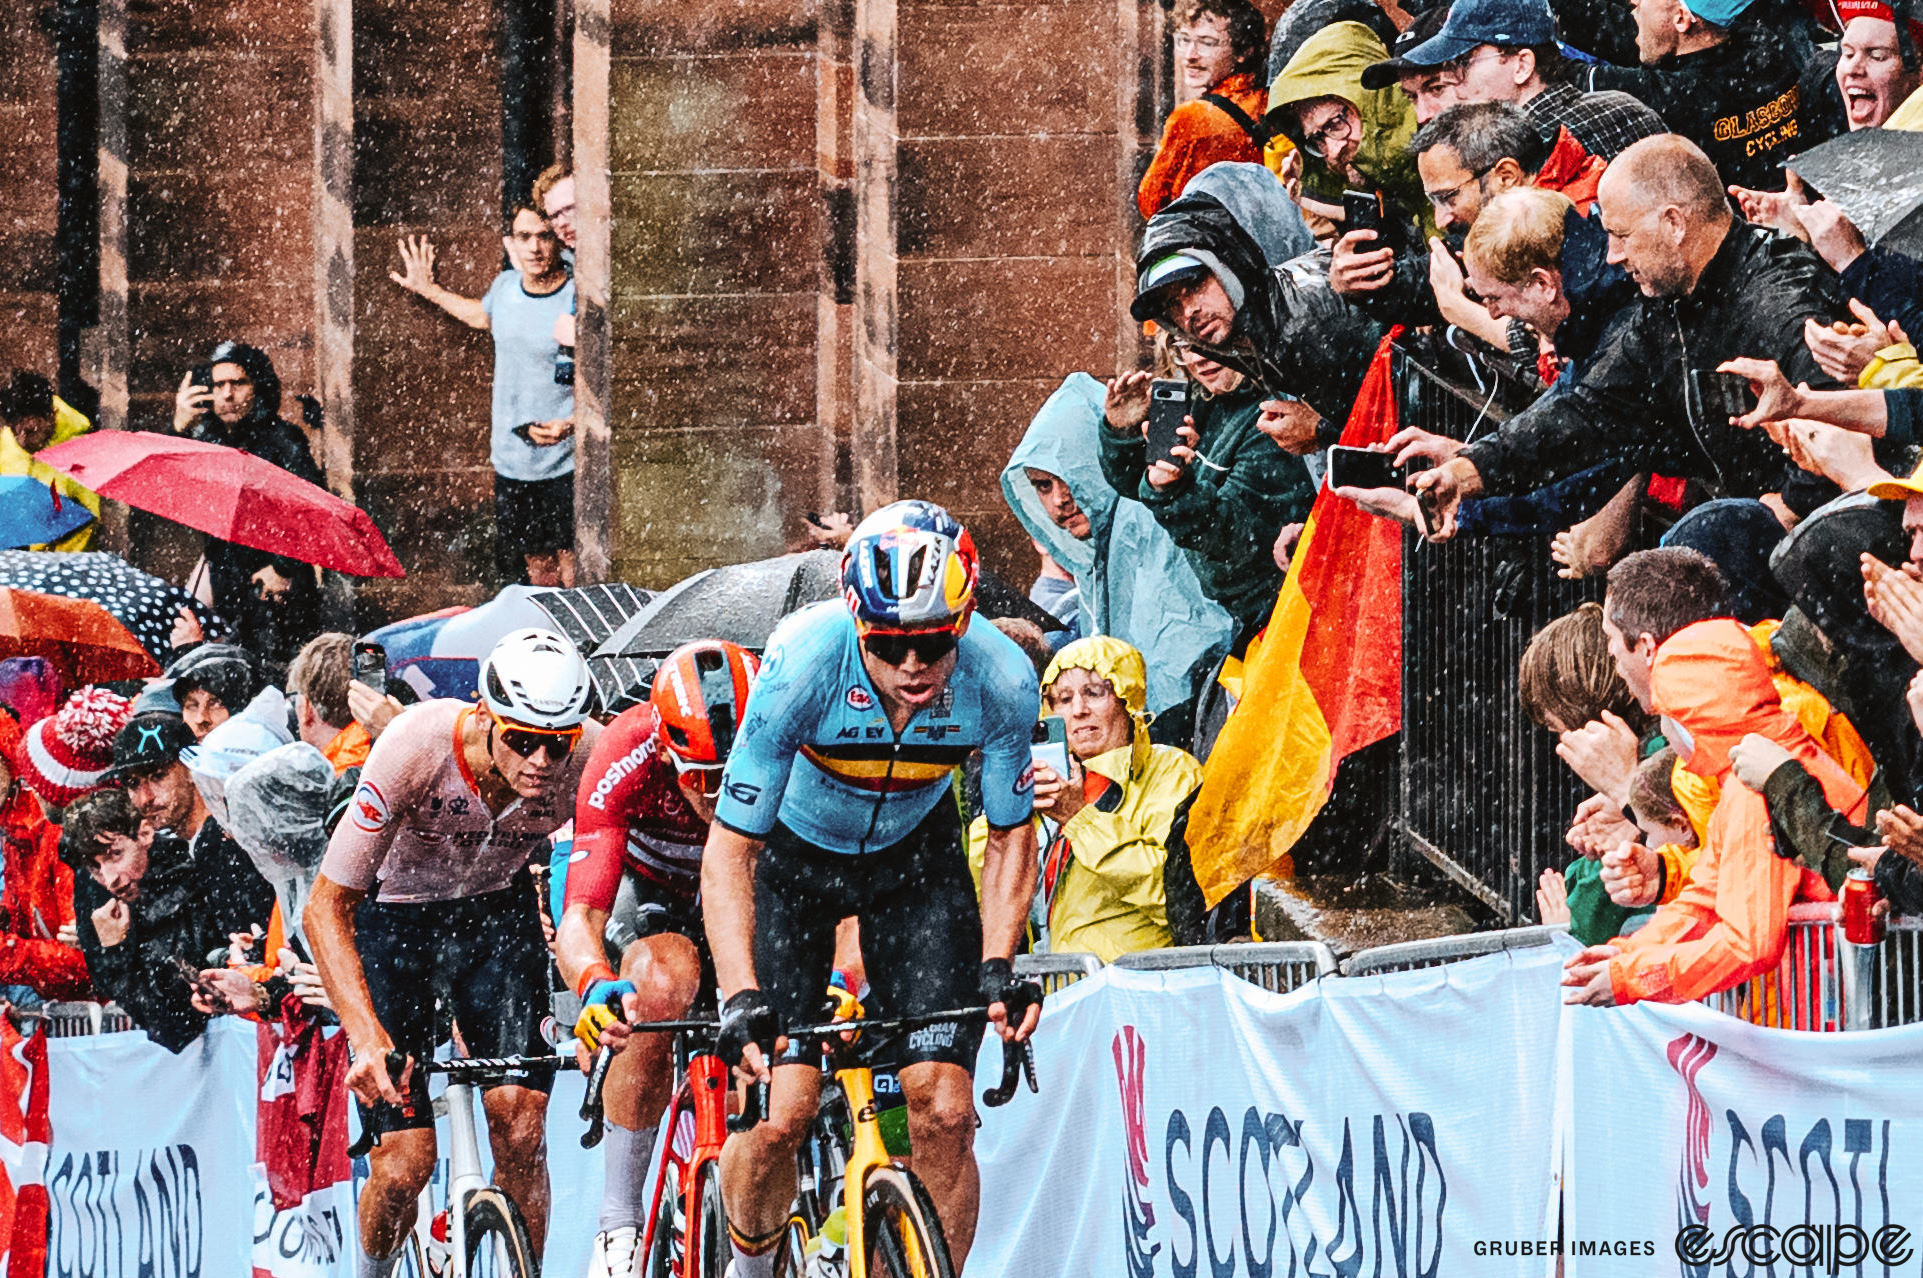 Wout van Aert leads Mads Pedersen and Mathieu van der Poel up a climb in the rain at the 2023 World Road Championships in Glasgow, Scotland.